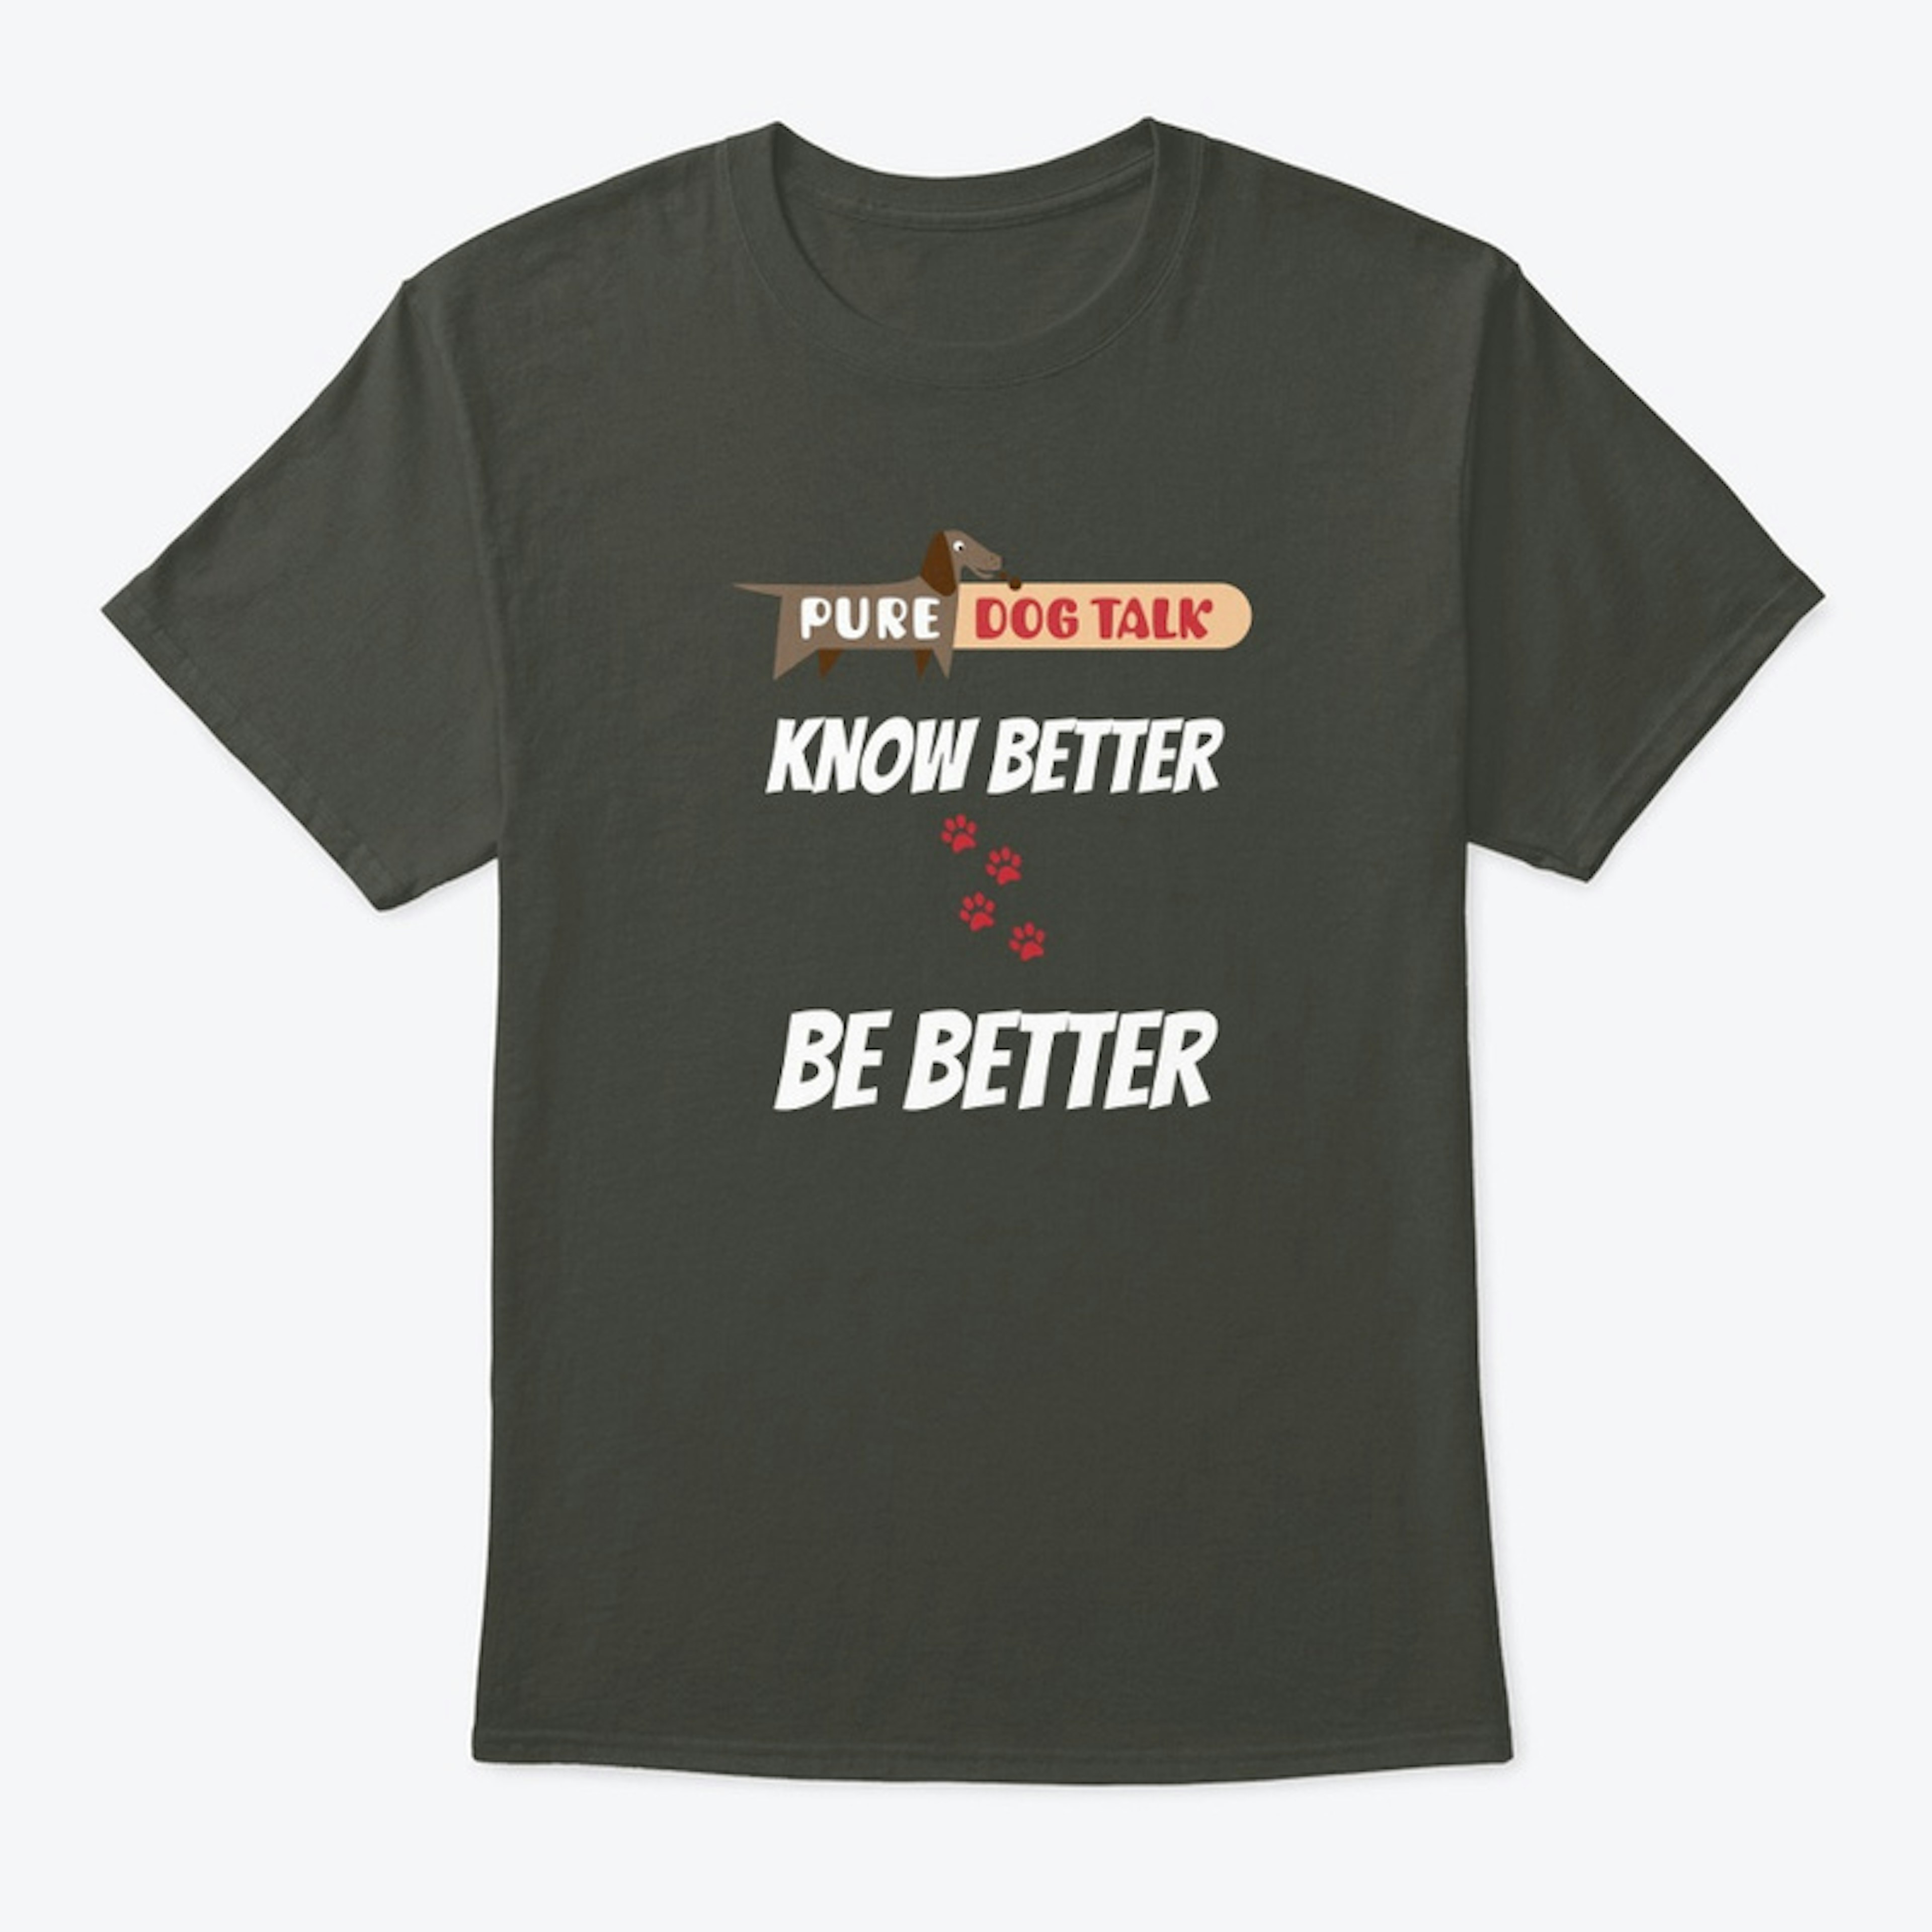 Know better, BE better.